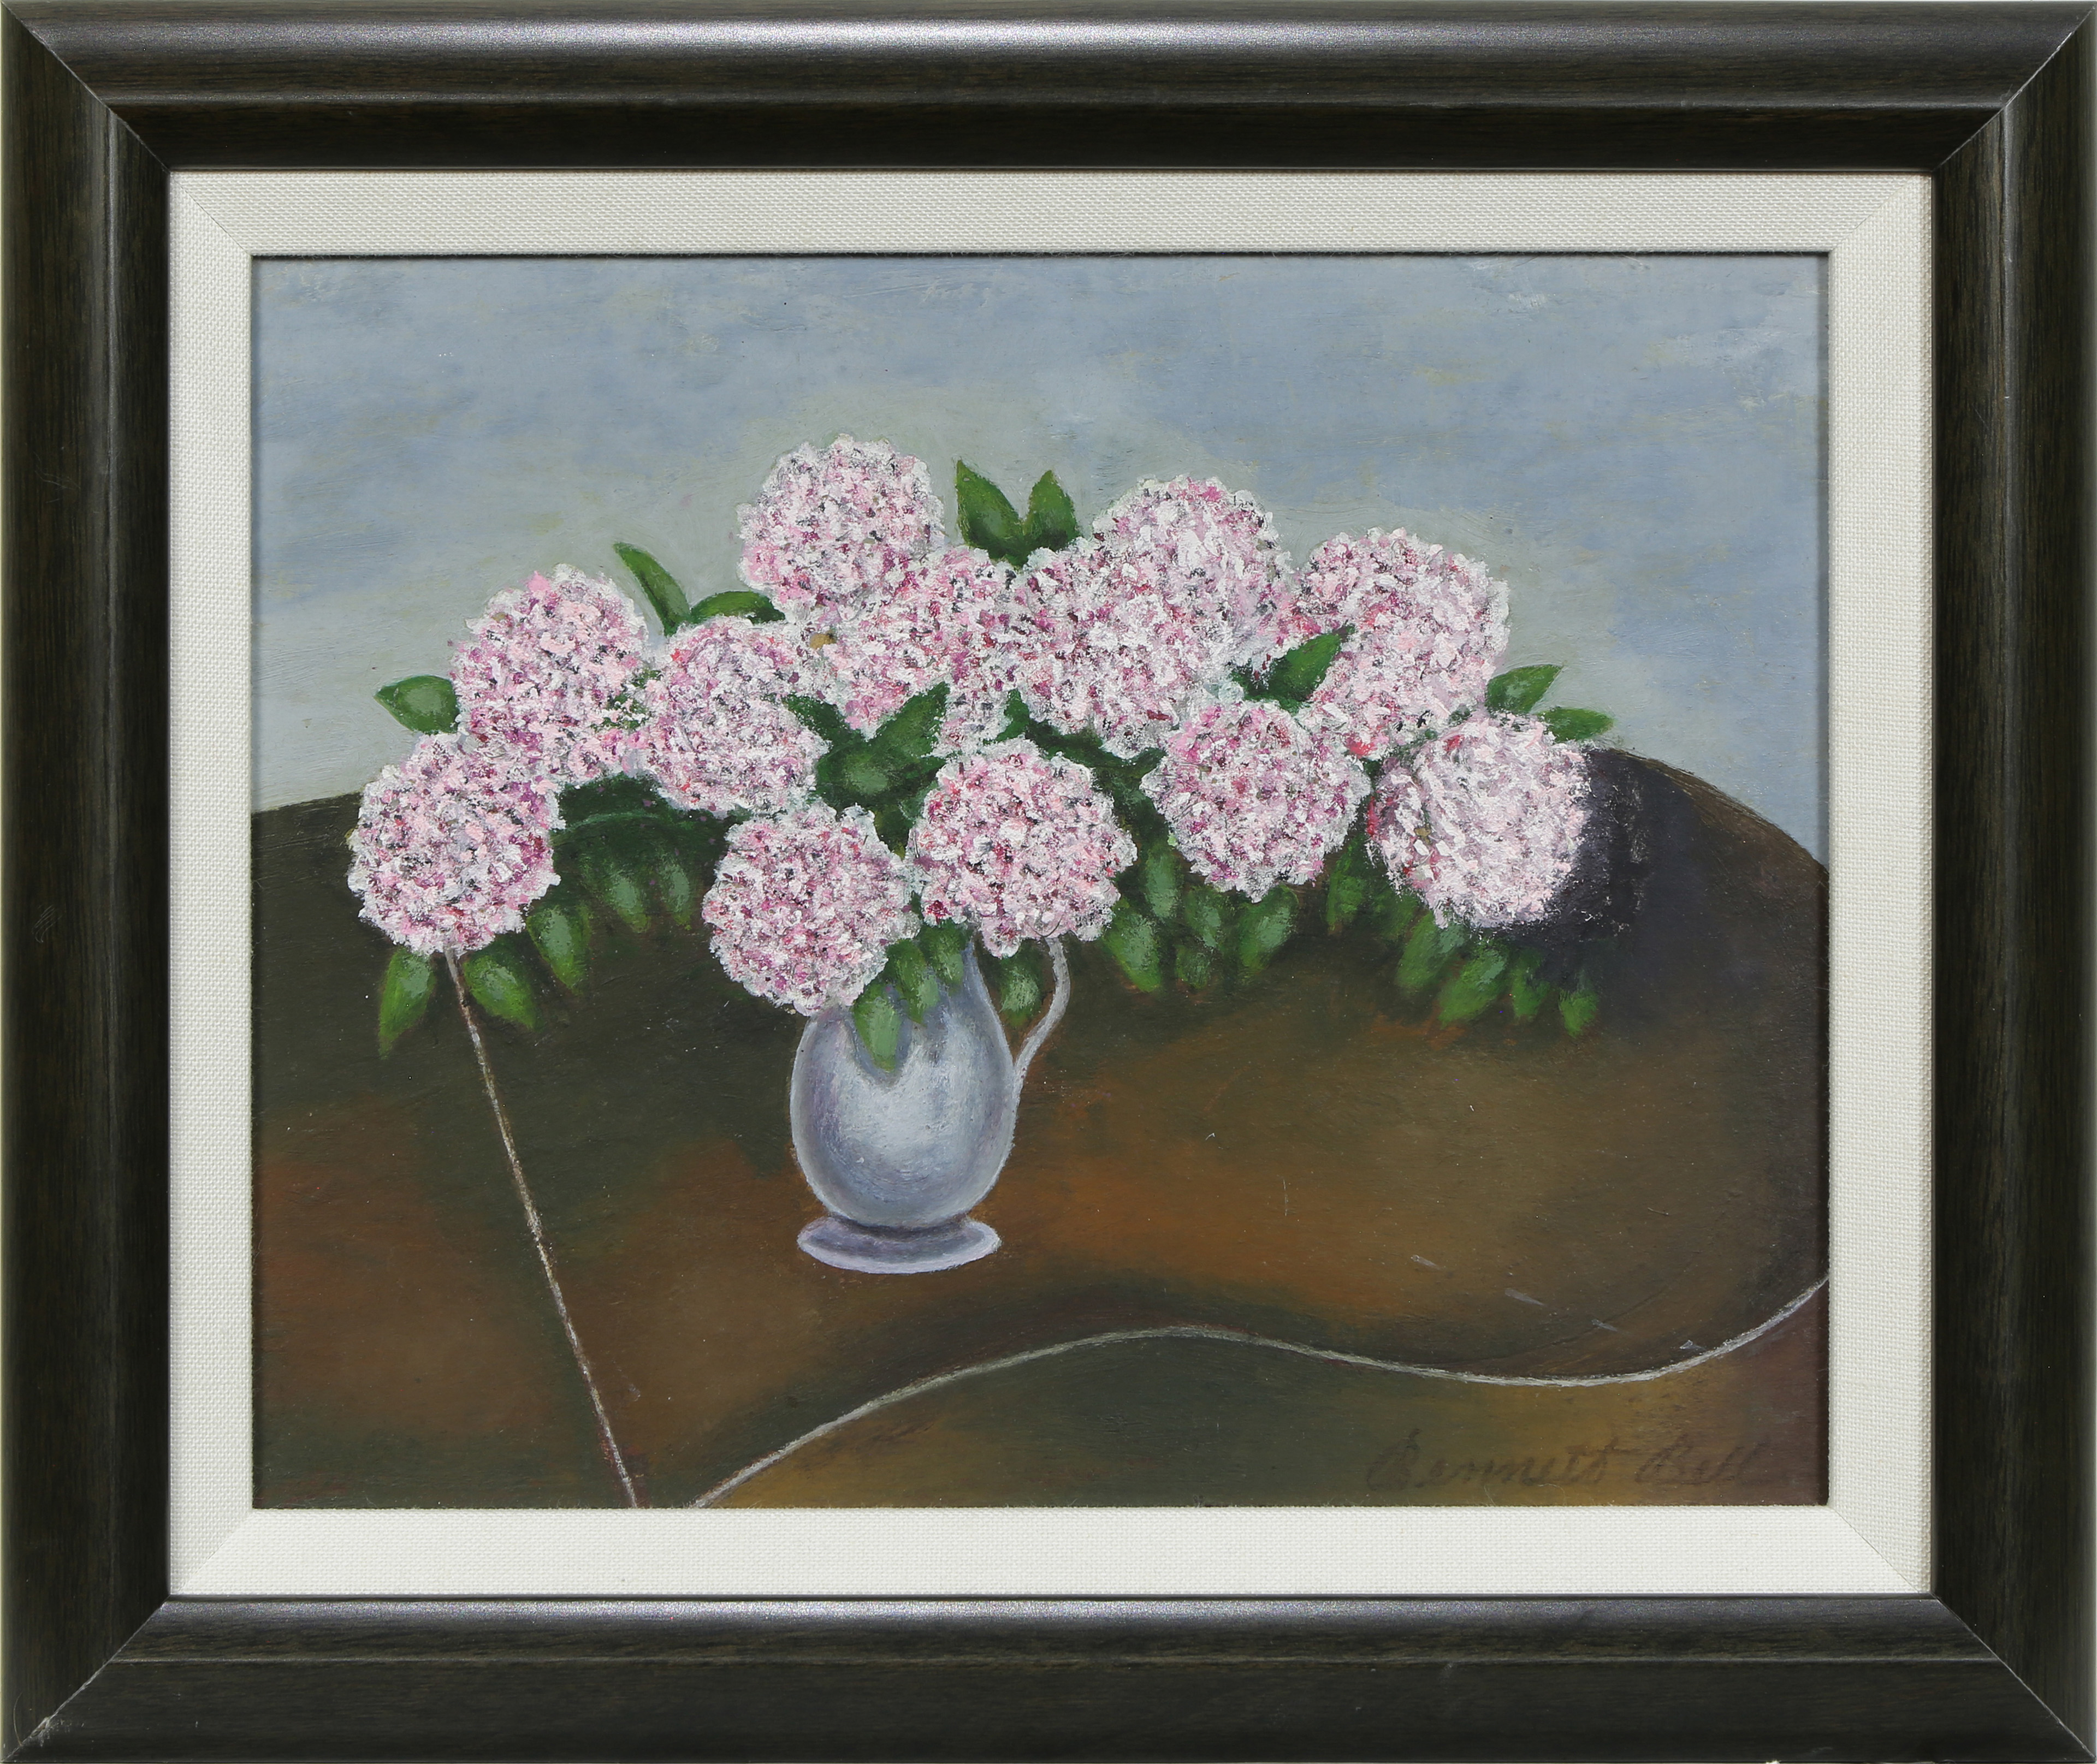 PAINTING STILL LIFE WITH HYDRANGEAS 3a6a80